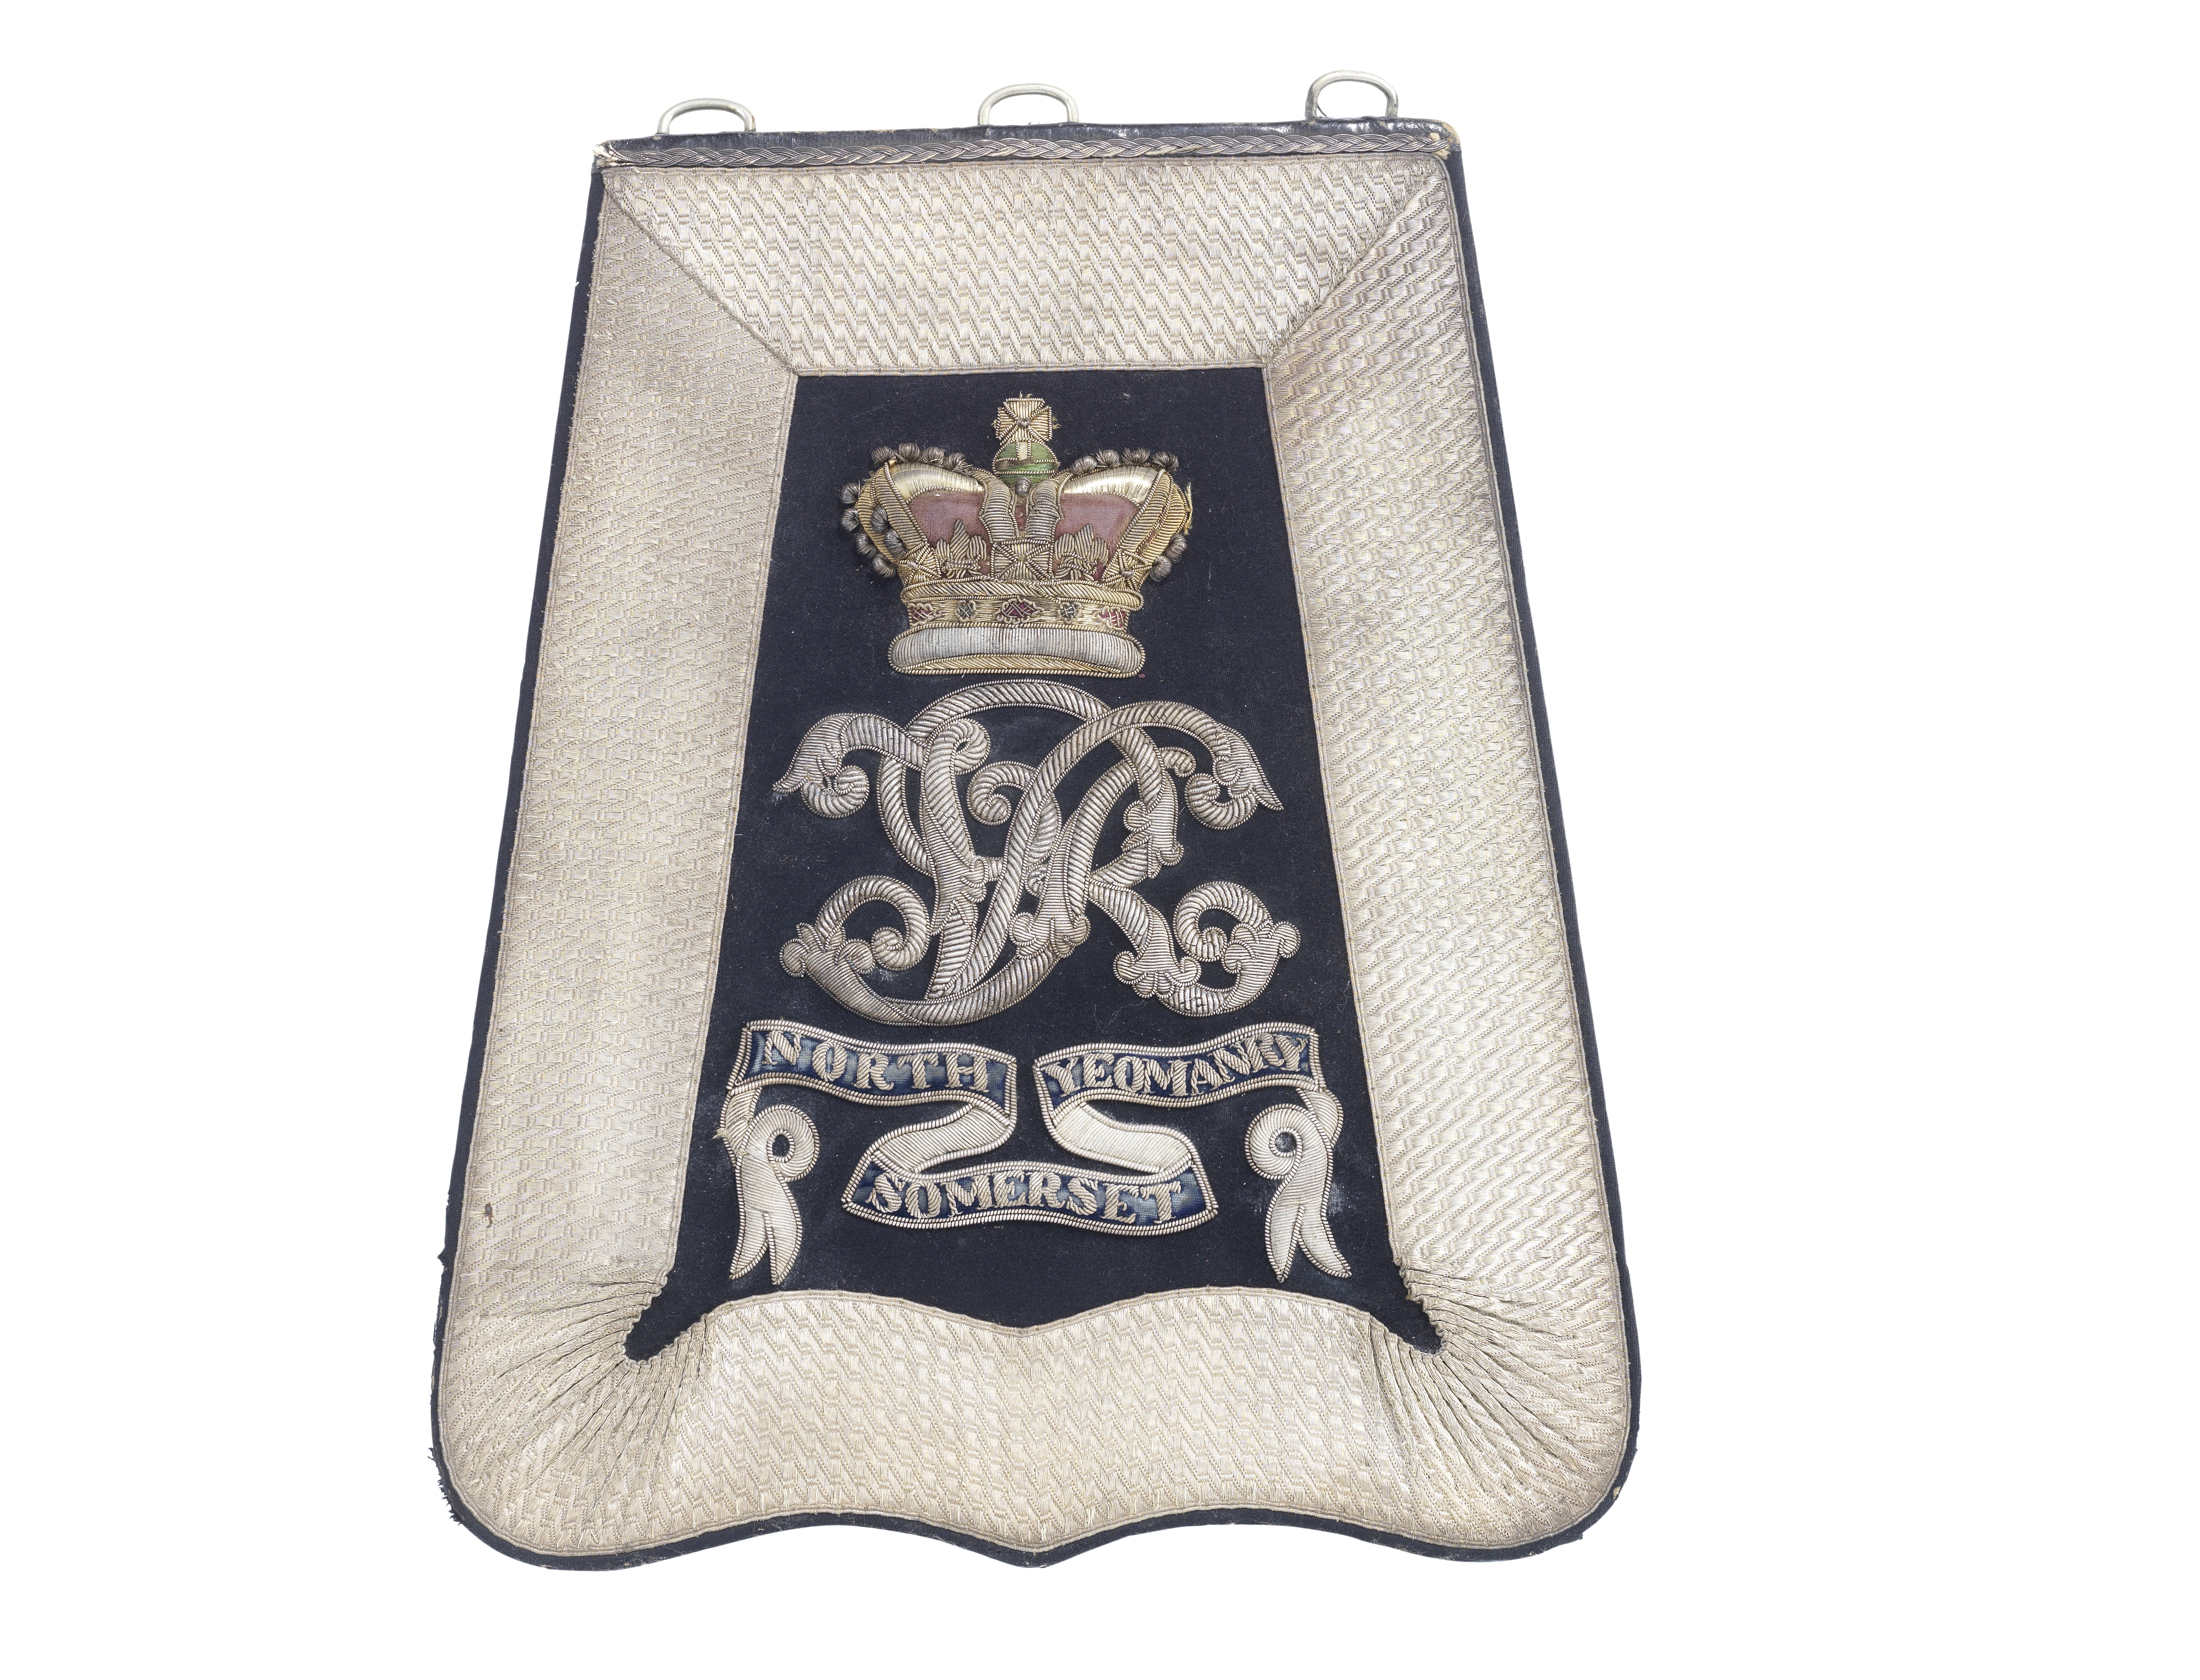 A Fine Officer's Full Dress Sabretache To The North Somerset Yeomanry